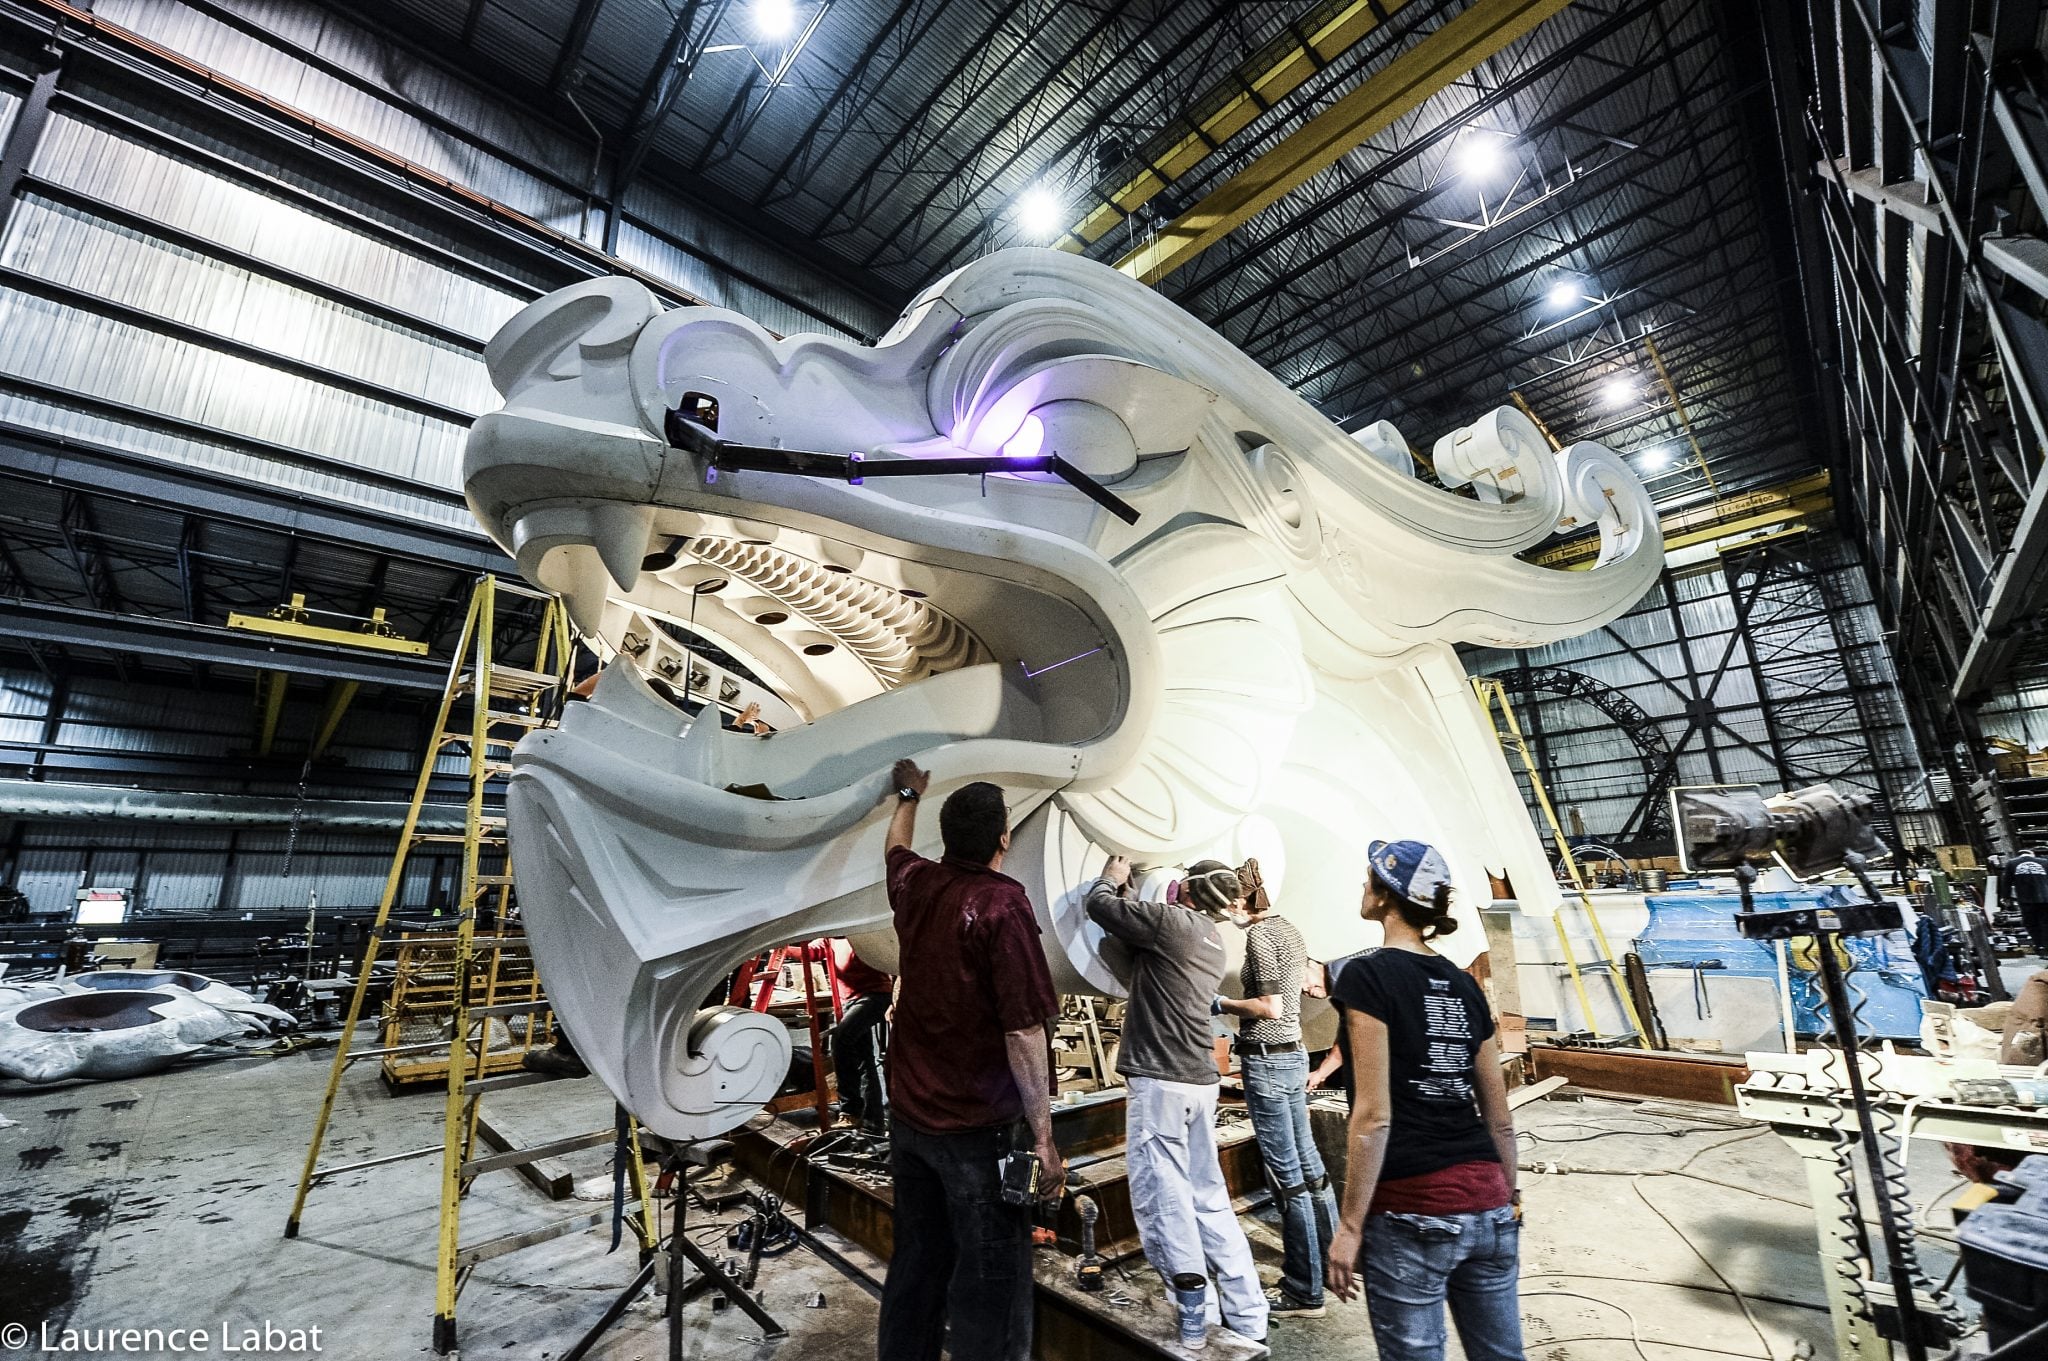 Our craftsmen working on the dragon's head